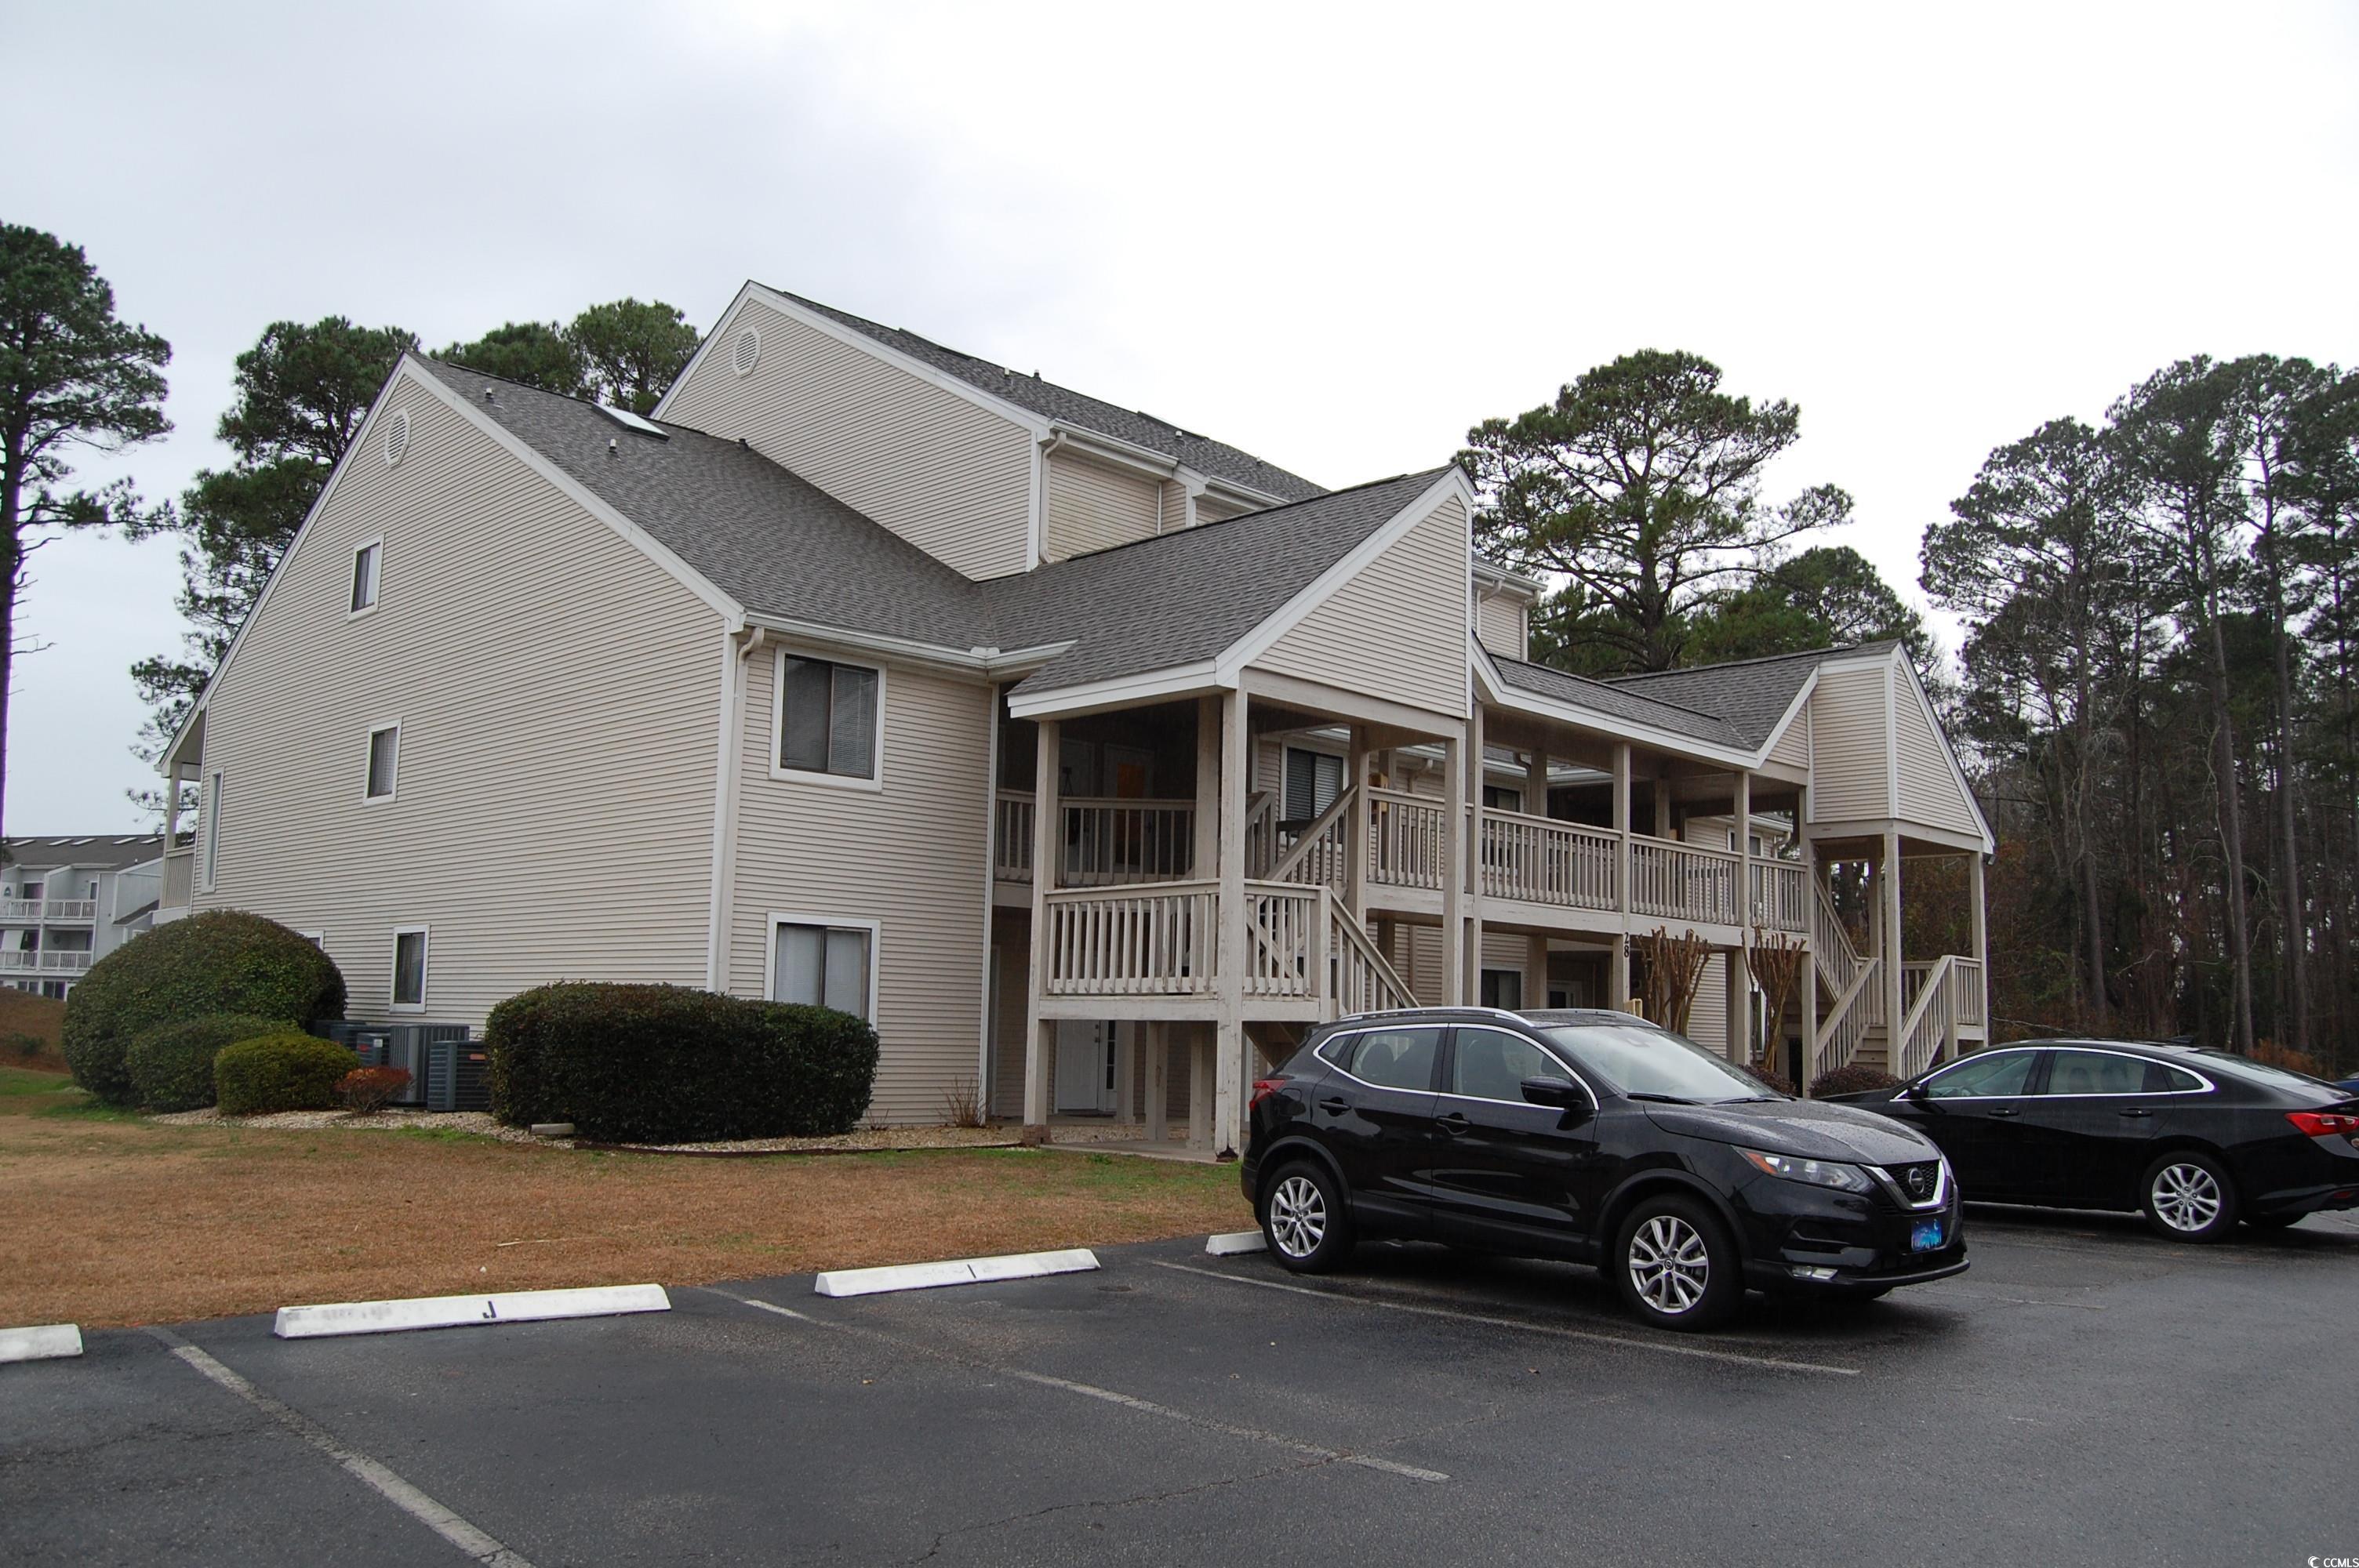 great little river location, one of the most unique towns along the grand strand.  2 bedroom, 2 full baths, easy access to hwy 17 and hwy 31, grocery stores, restaurants, golfing and shopping.  close to the cherry grove section of north myrtle beach. fully furnished including washer/dryer.  nice 2nd floor balcony.  hoa includes access to an indoor and outdoor pool.  close to the beach.